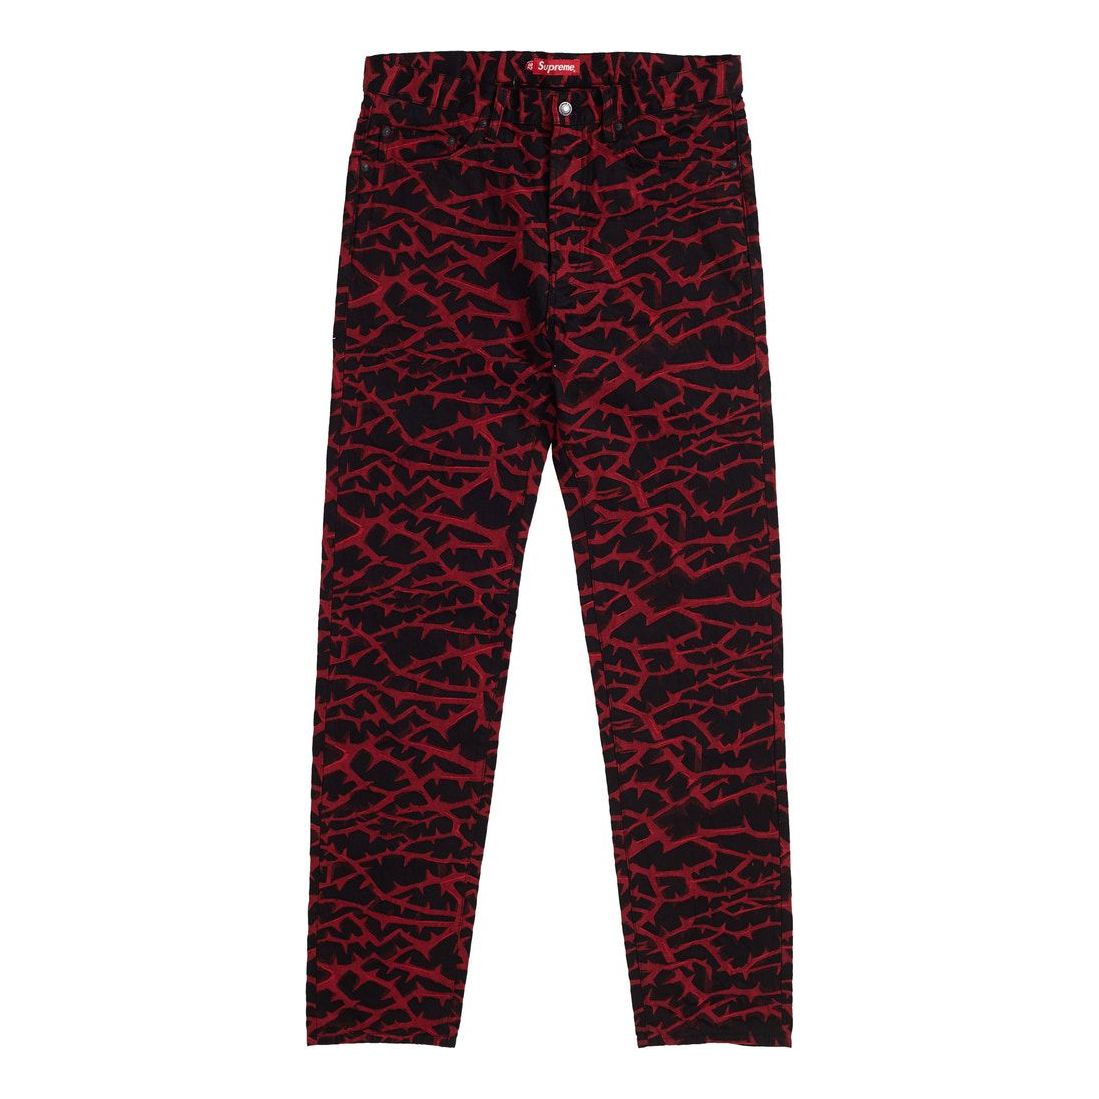 Supreme FW18 Thorn Jean Red Thorns Casual Pants Long Pants SUP